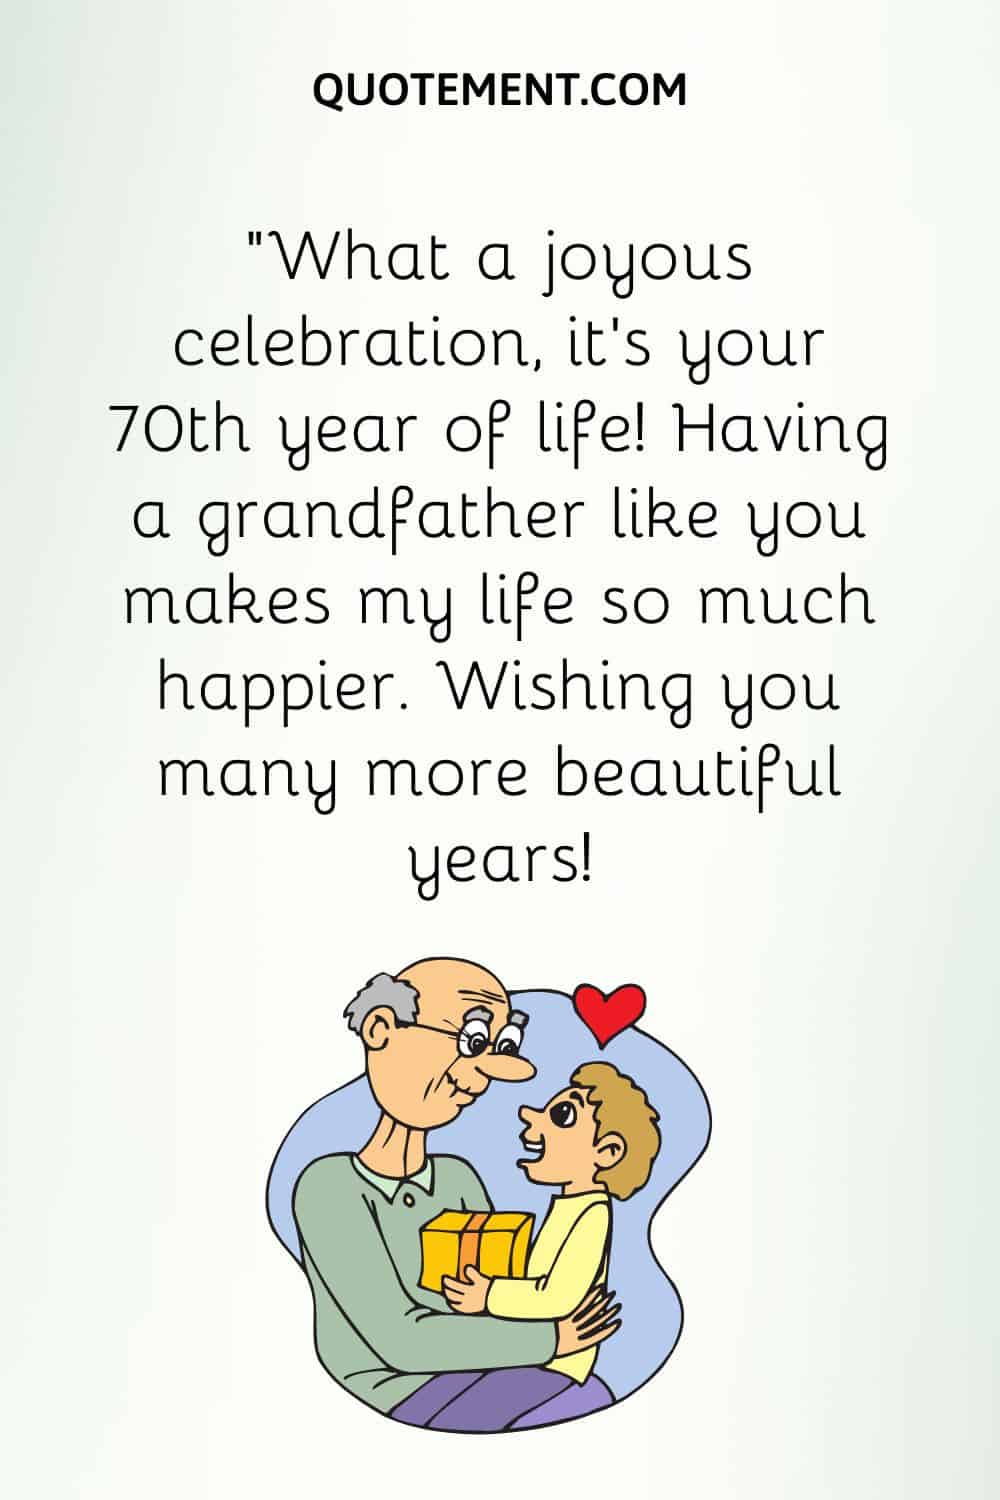 “What a joyous celebration, it’s your 70th year of life! Having a grandfather like you makes my life so much happier. Wishing you many more beautiful years!